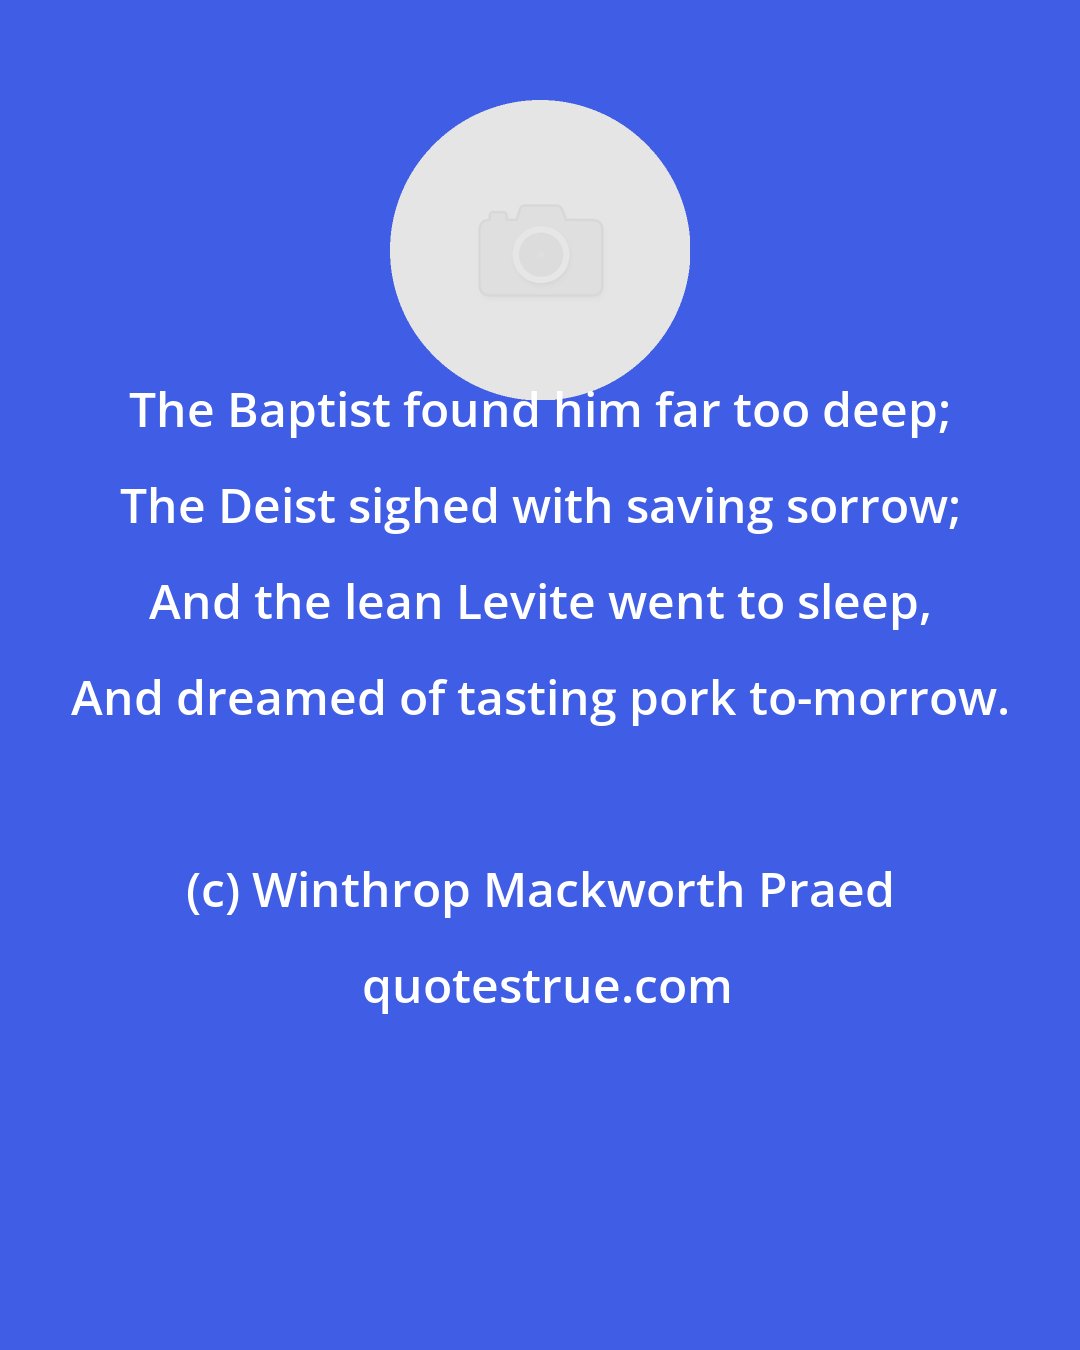 Winthrop Mackworth Praed: The Baptist found him far too deep; The Deist sighed with saving sorrow; And the lean Levite went to sleep, And dreamed of tasting pork to-morrow.